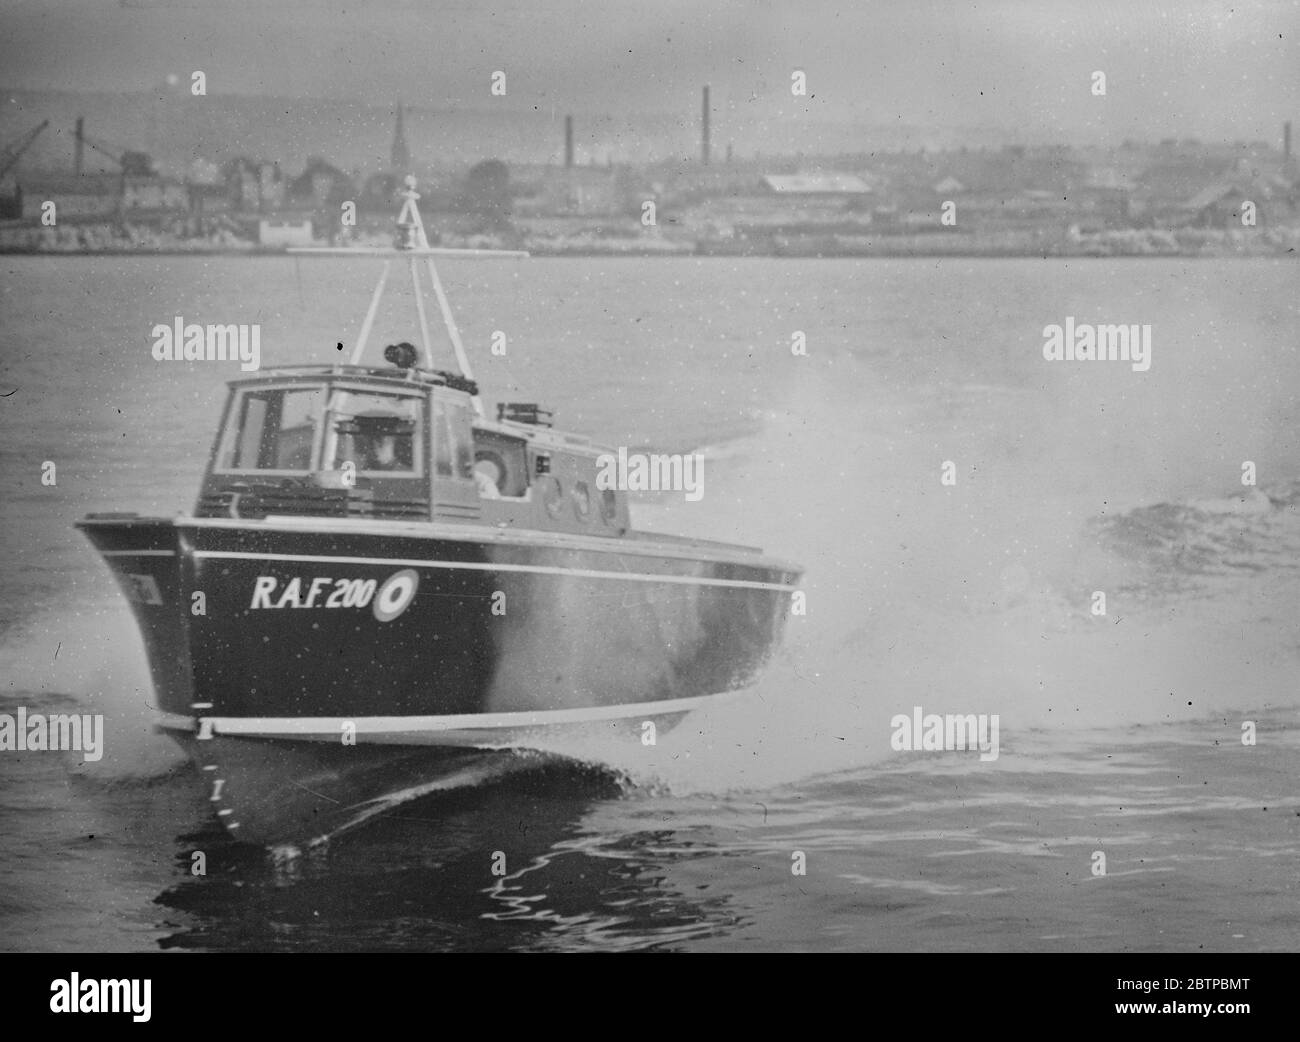 Air crash patrol . 18 rescue boats for use on the sea after aeroplane crashes or forced landings by aeroplanes , are to be stationed round the English coast . 20 January 1932 Stock Photo